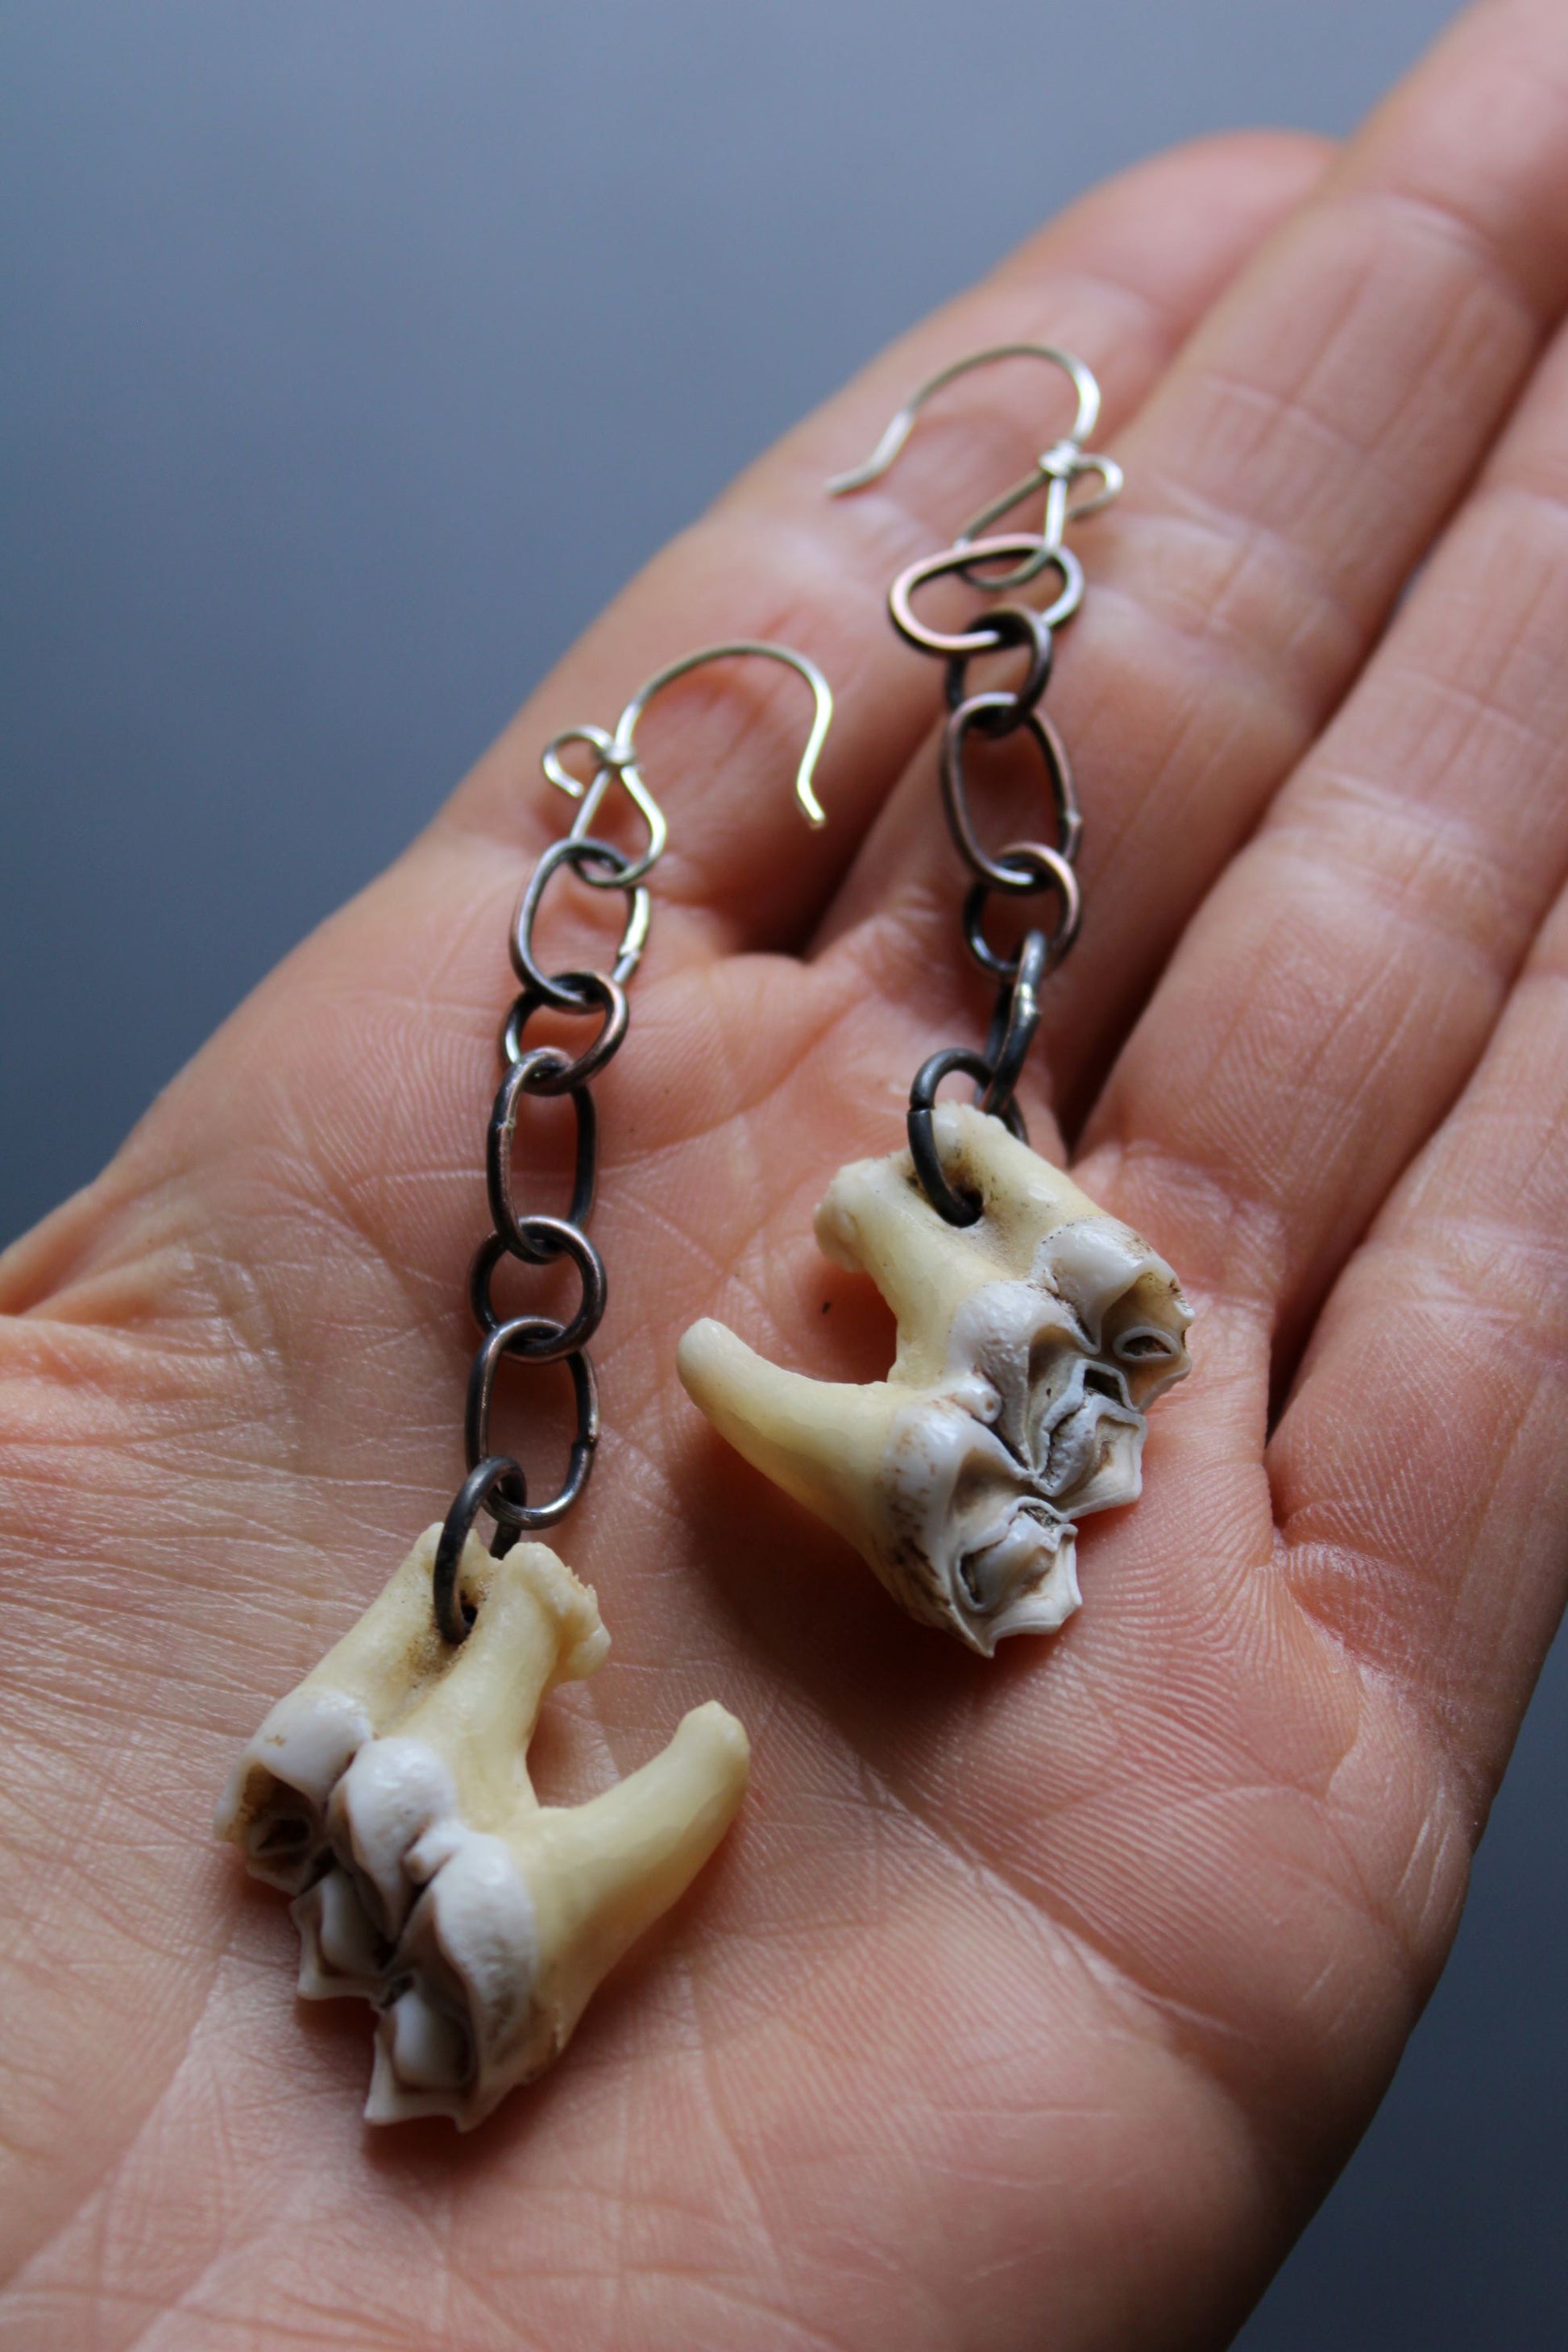 post apocalyptic earth, ear necklace, necklace of apocalypse now, apocalyptic bone jewelry, post apocalyptic jewelry, one of a kind bone jewelry, one of a kind bone earrings, one of a kind bone earrings jewelry,  Cruelty free bone jewelry, handmade bone jewelry, taxidermy jewelry, forest collected bone, forest collected bone jewelry, collection bone jewelry